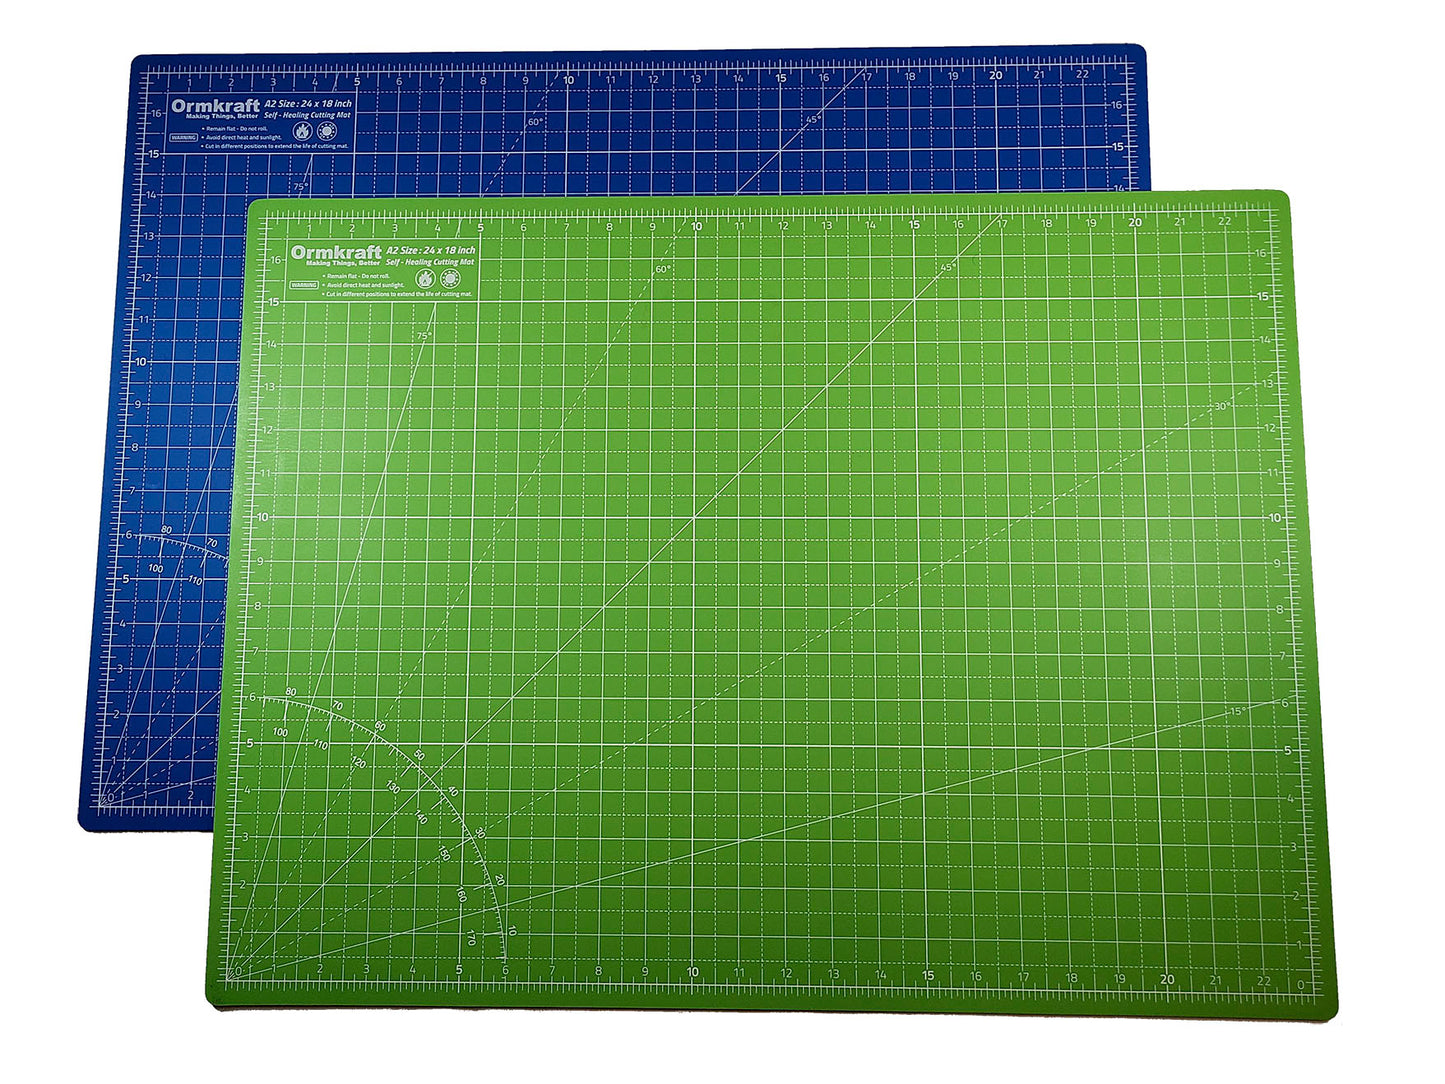 Size A2 18 X 24 Self-healing CUTTING MAT Reversible Inches and Centimeters  Thoughtful Design 5 Layer Mat, Finest Available 